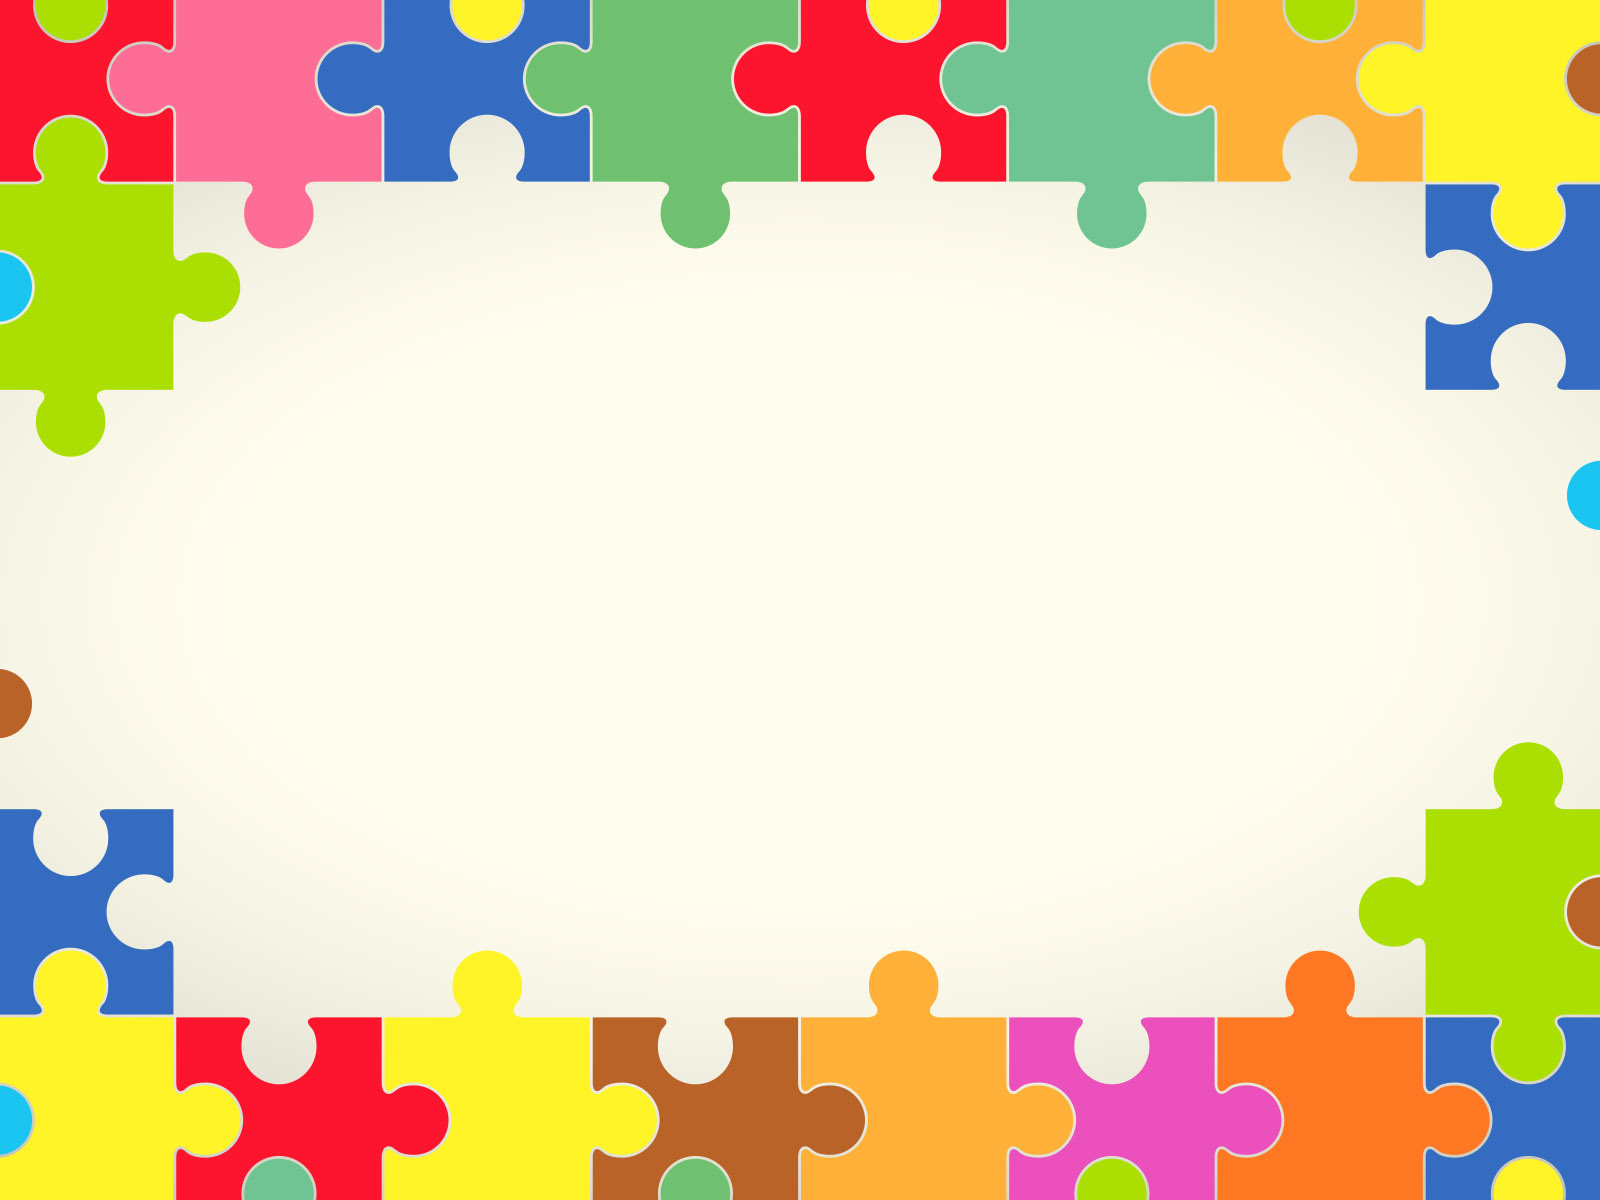 Colourful Puzzles  Powerpoint Templates  Border Frames 